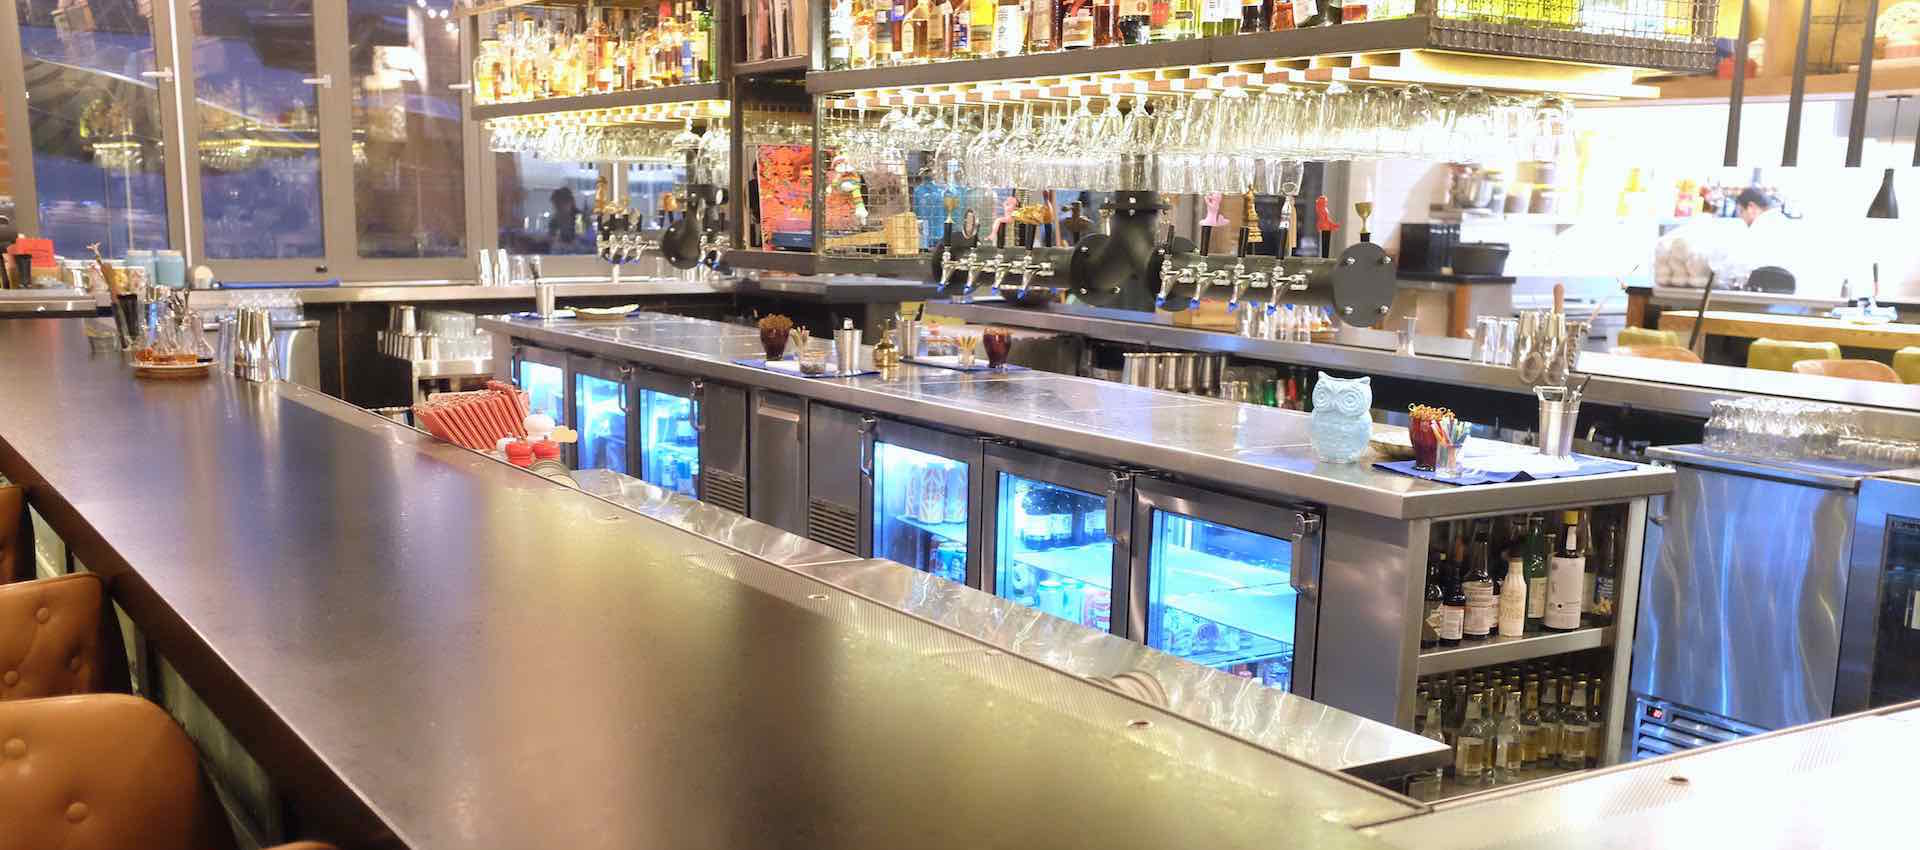 HRS Now Offers Full-Service Cleaning Options for Food & Beverage Outlets